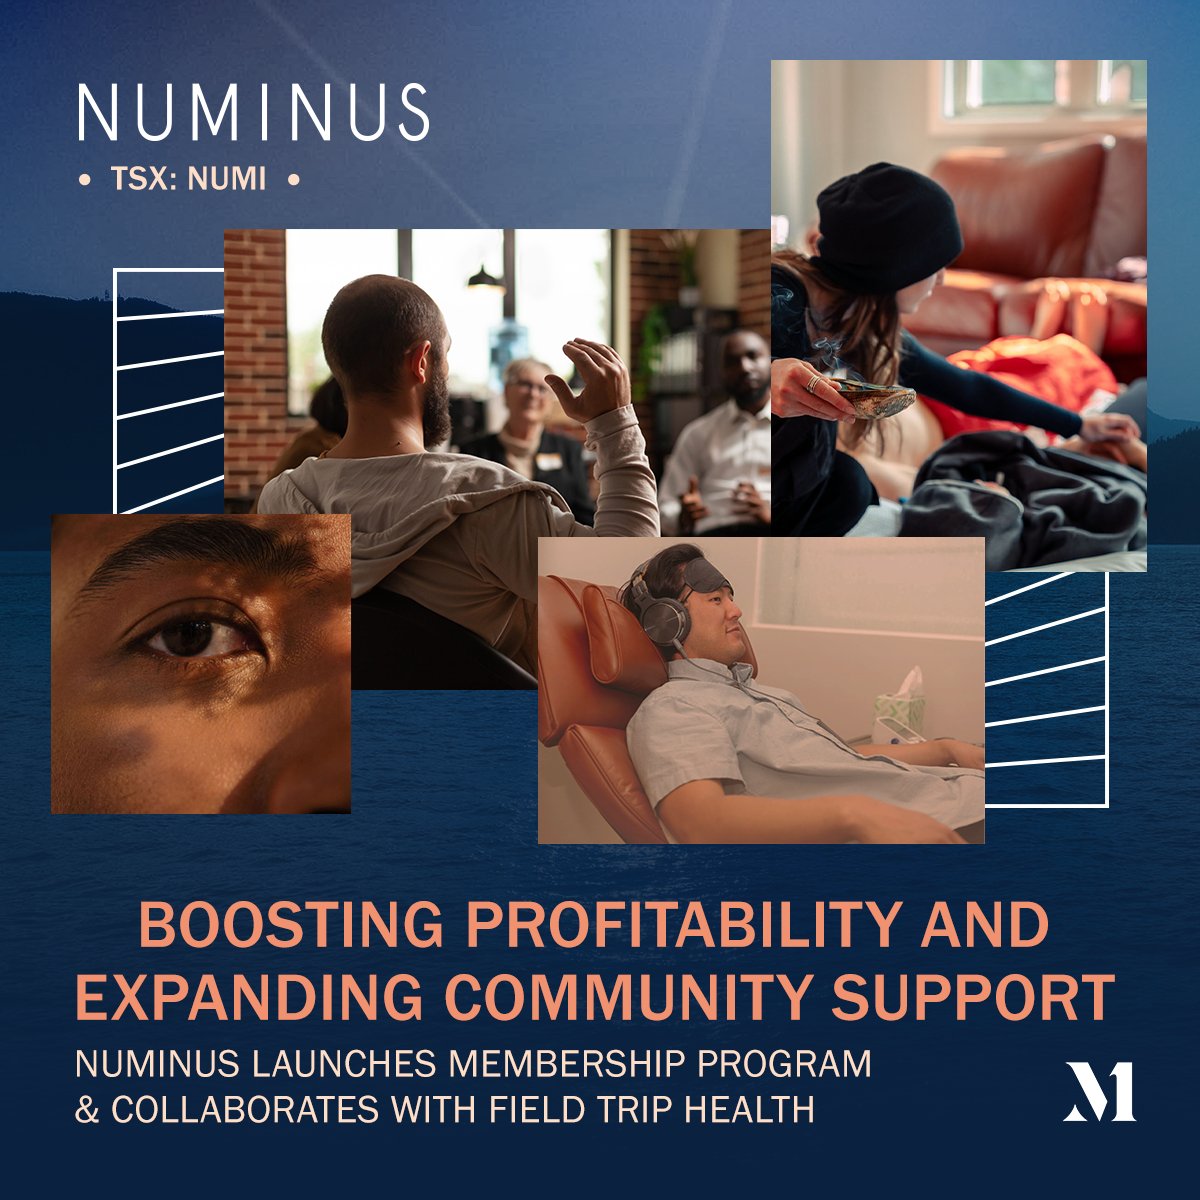 .@NuminusHealth (TSX: $NUMI) has unveiled a strategic plan to streamline expenses and sharpen the company’s focus on its higher-growth US operations, all while driving profitability and community support. Highlights from the plan include: 🇨🇦 An agreement with @fieldtriphealth to…